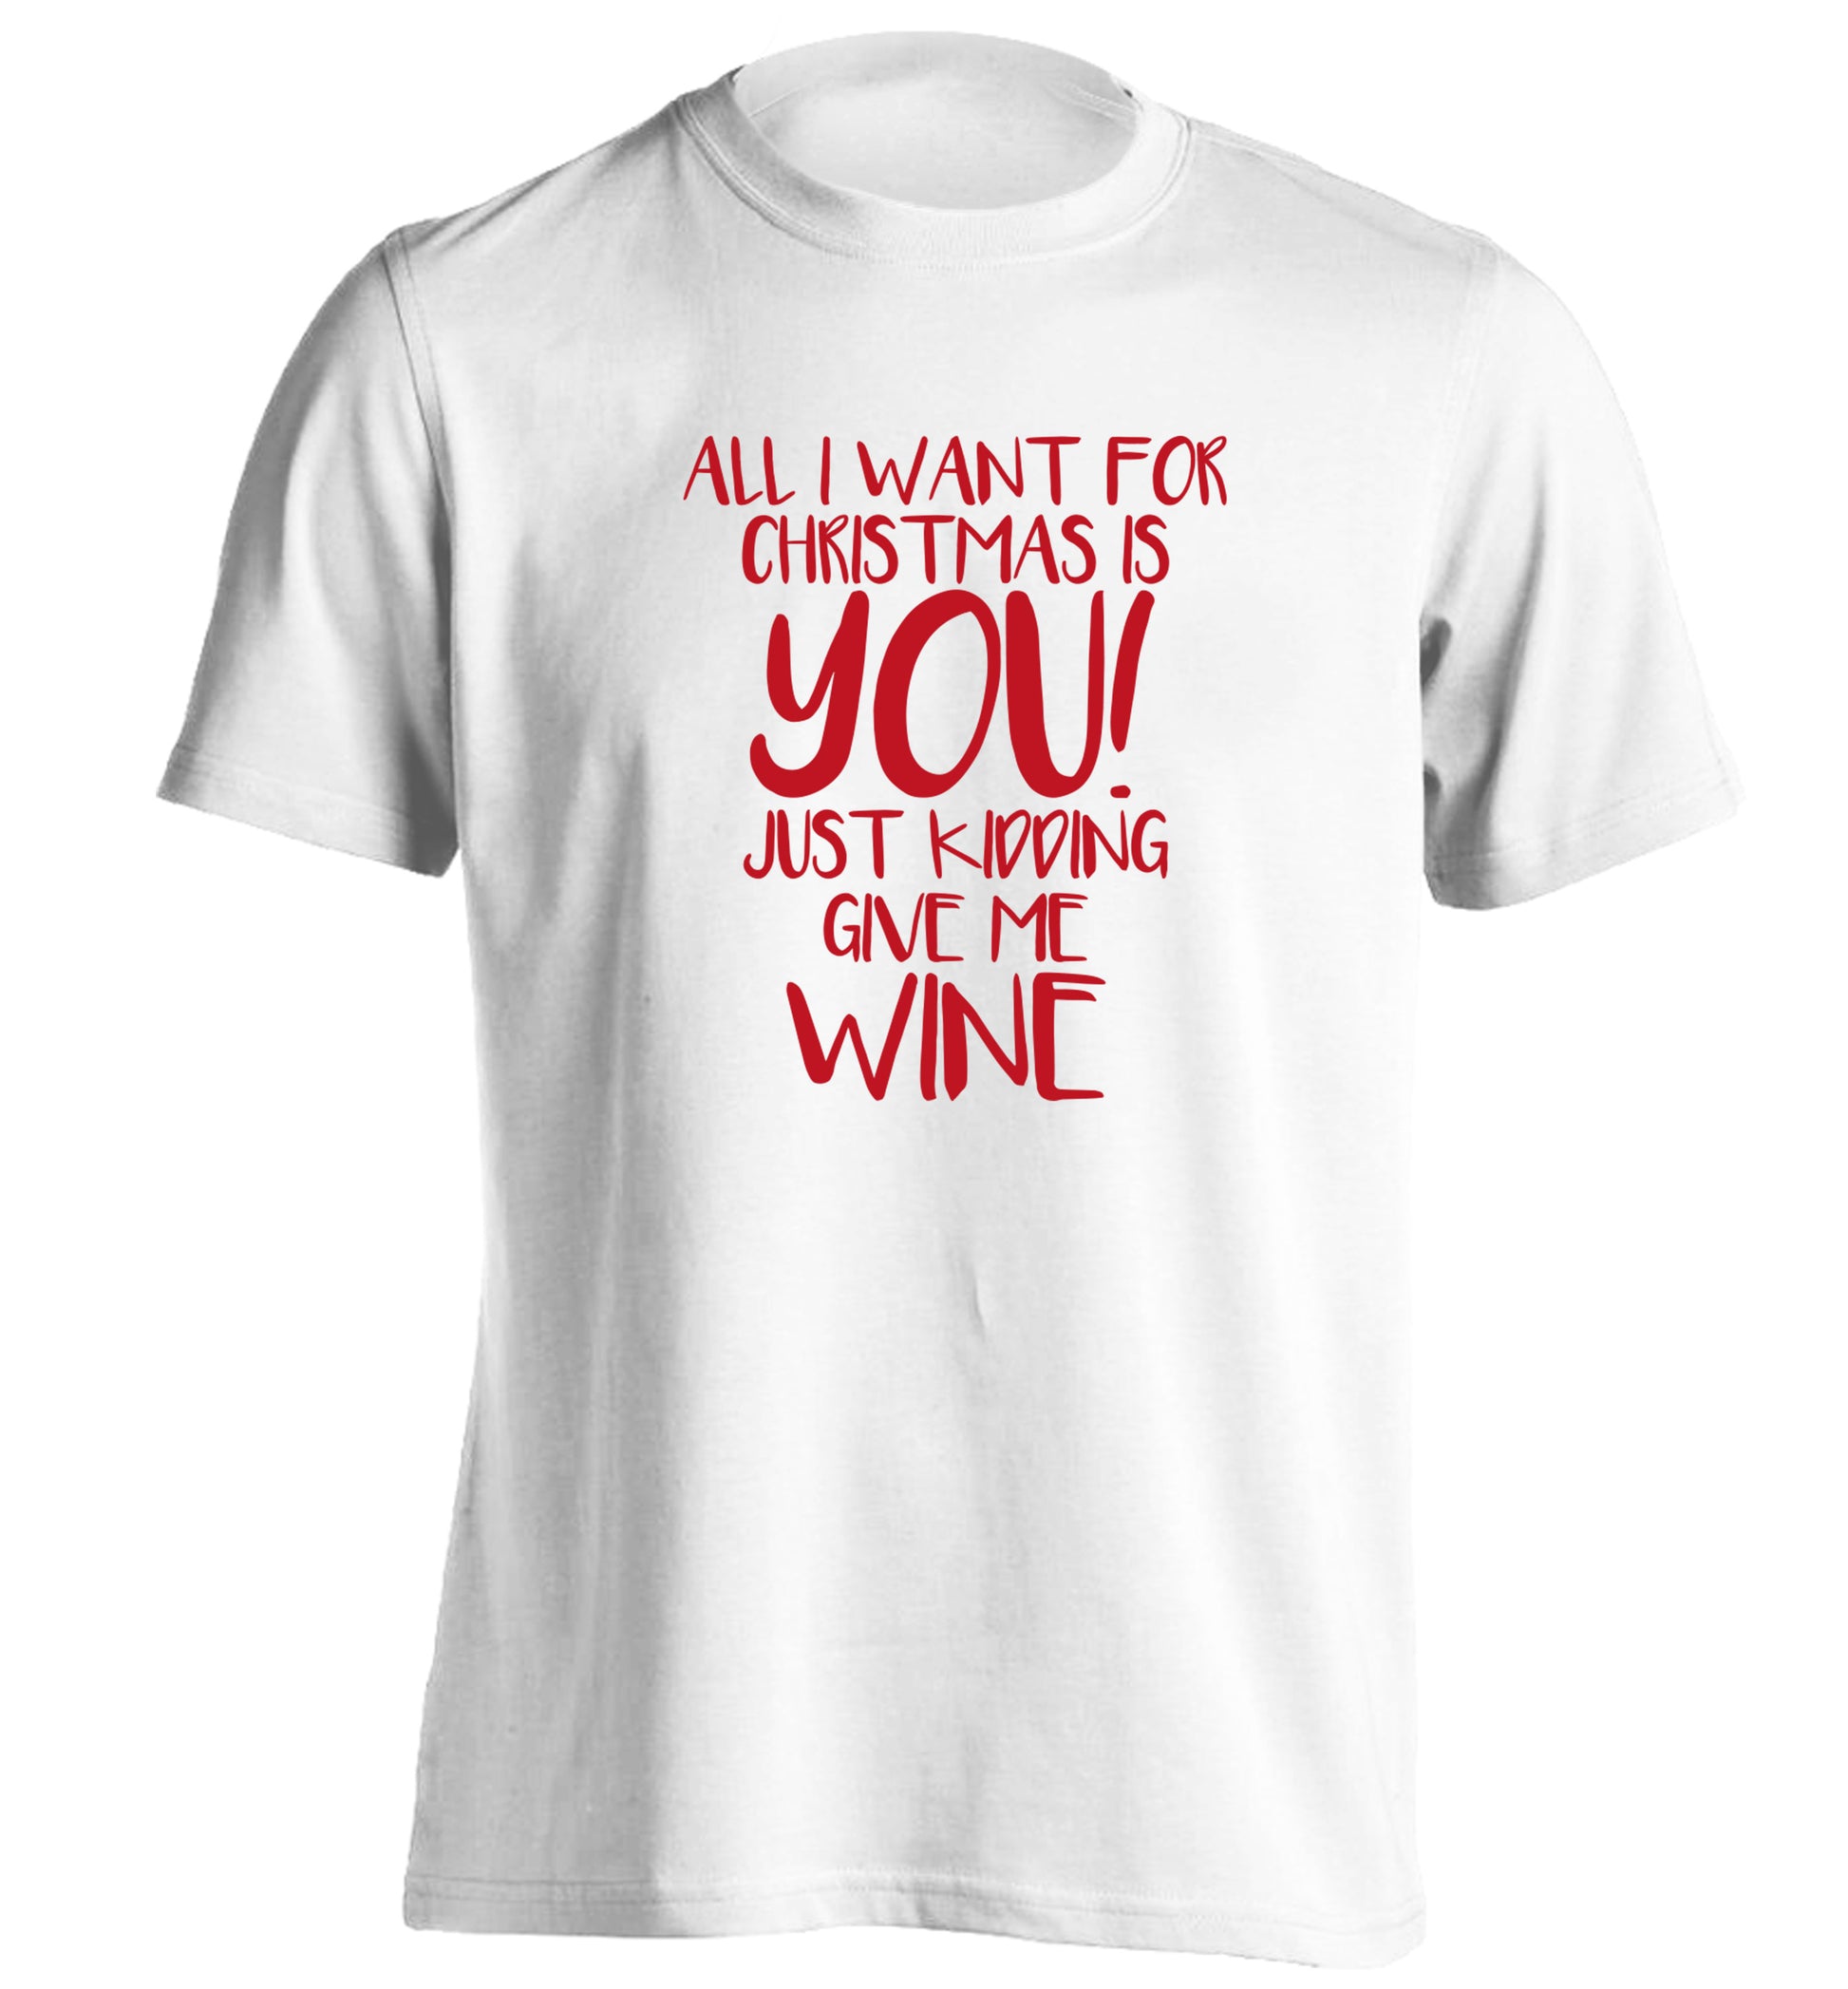 All I want for christmas is you just kidding give me the wine adults unisex white Tshirt 2XL